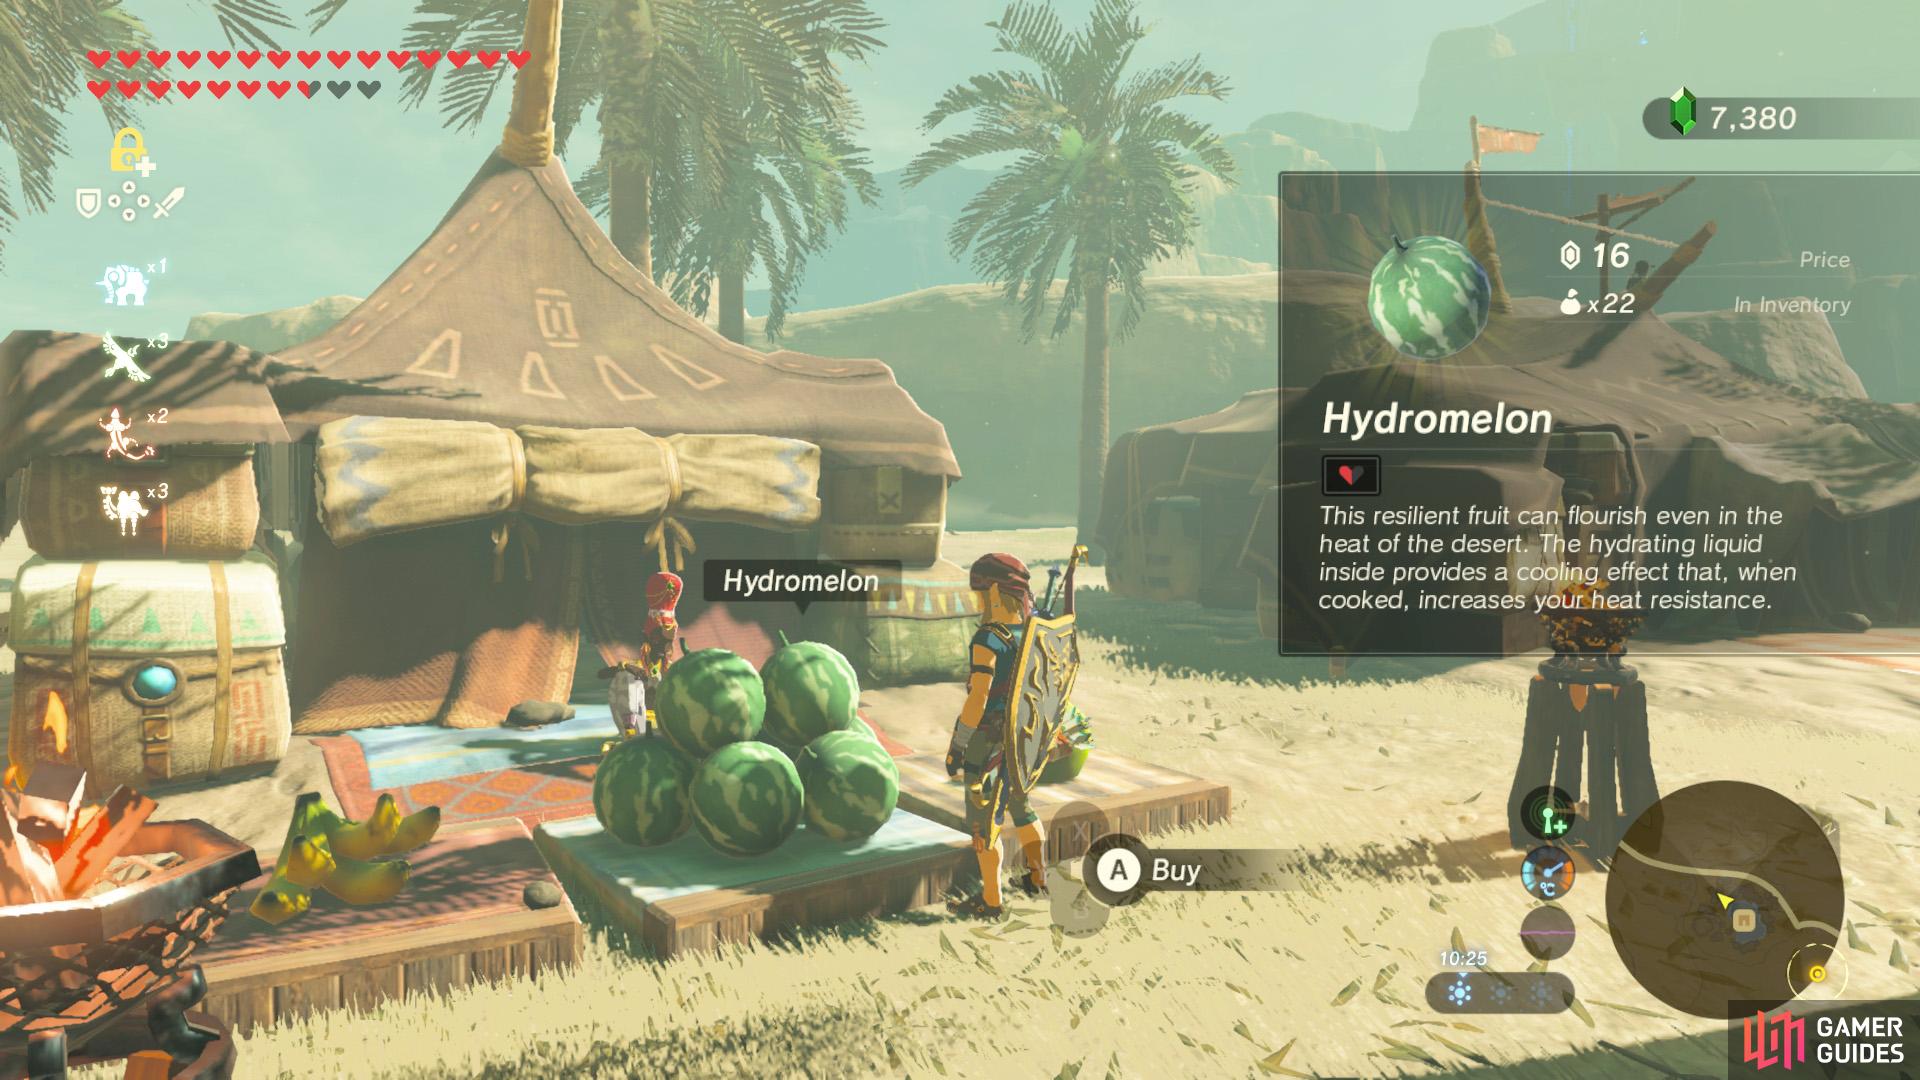 Hydromelon can be purchased or found in the Gerudo region.